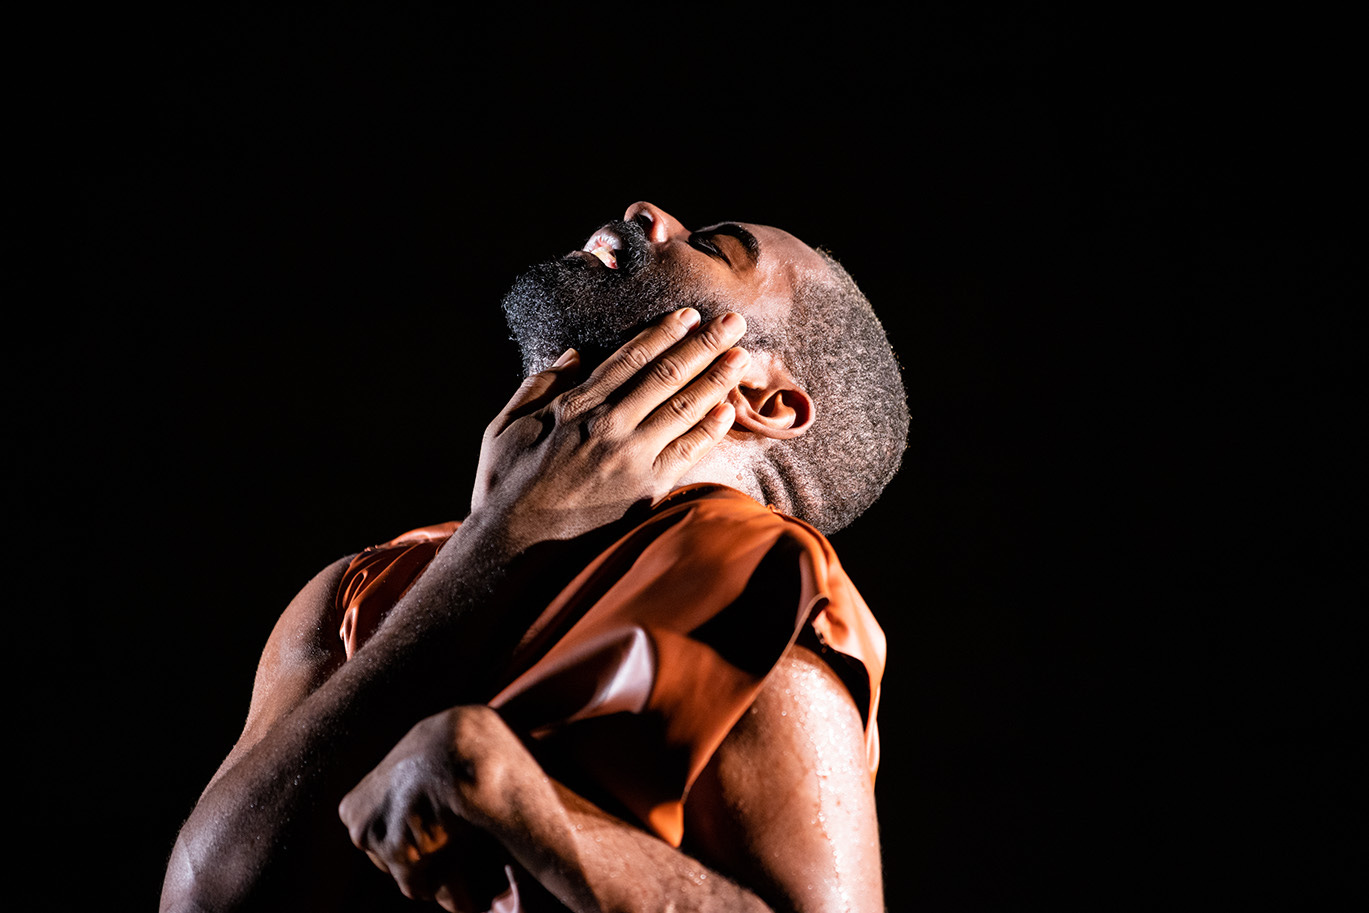 A Black Disabled man is looking up but his eyes are closed. One hand caresses his face, the other is pulled tight towards his body. Jerron Herman. Photo: Maria Baranova. Courtesy the artist and Abrons Arts Center, New York.